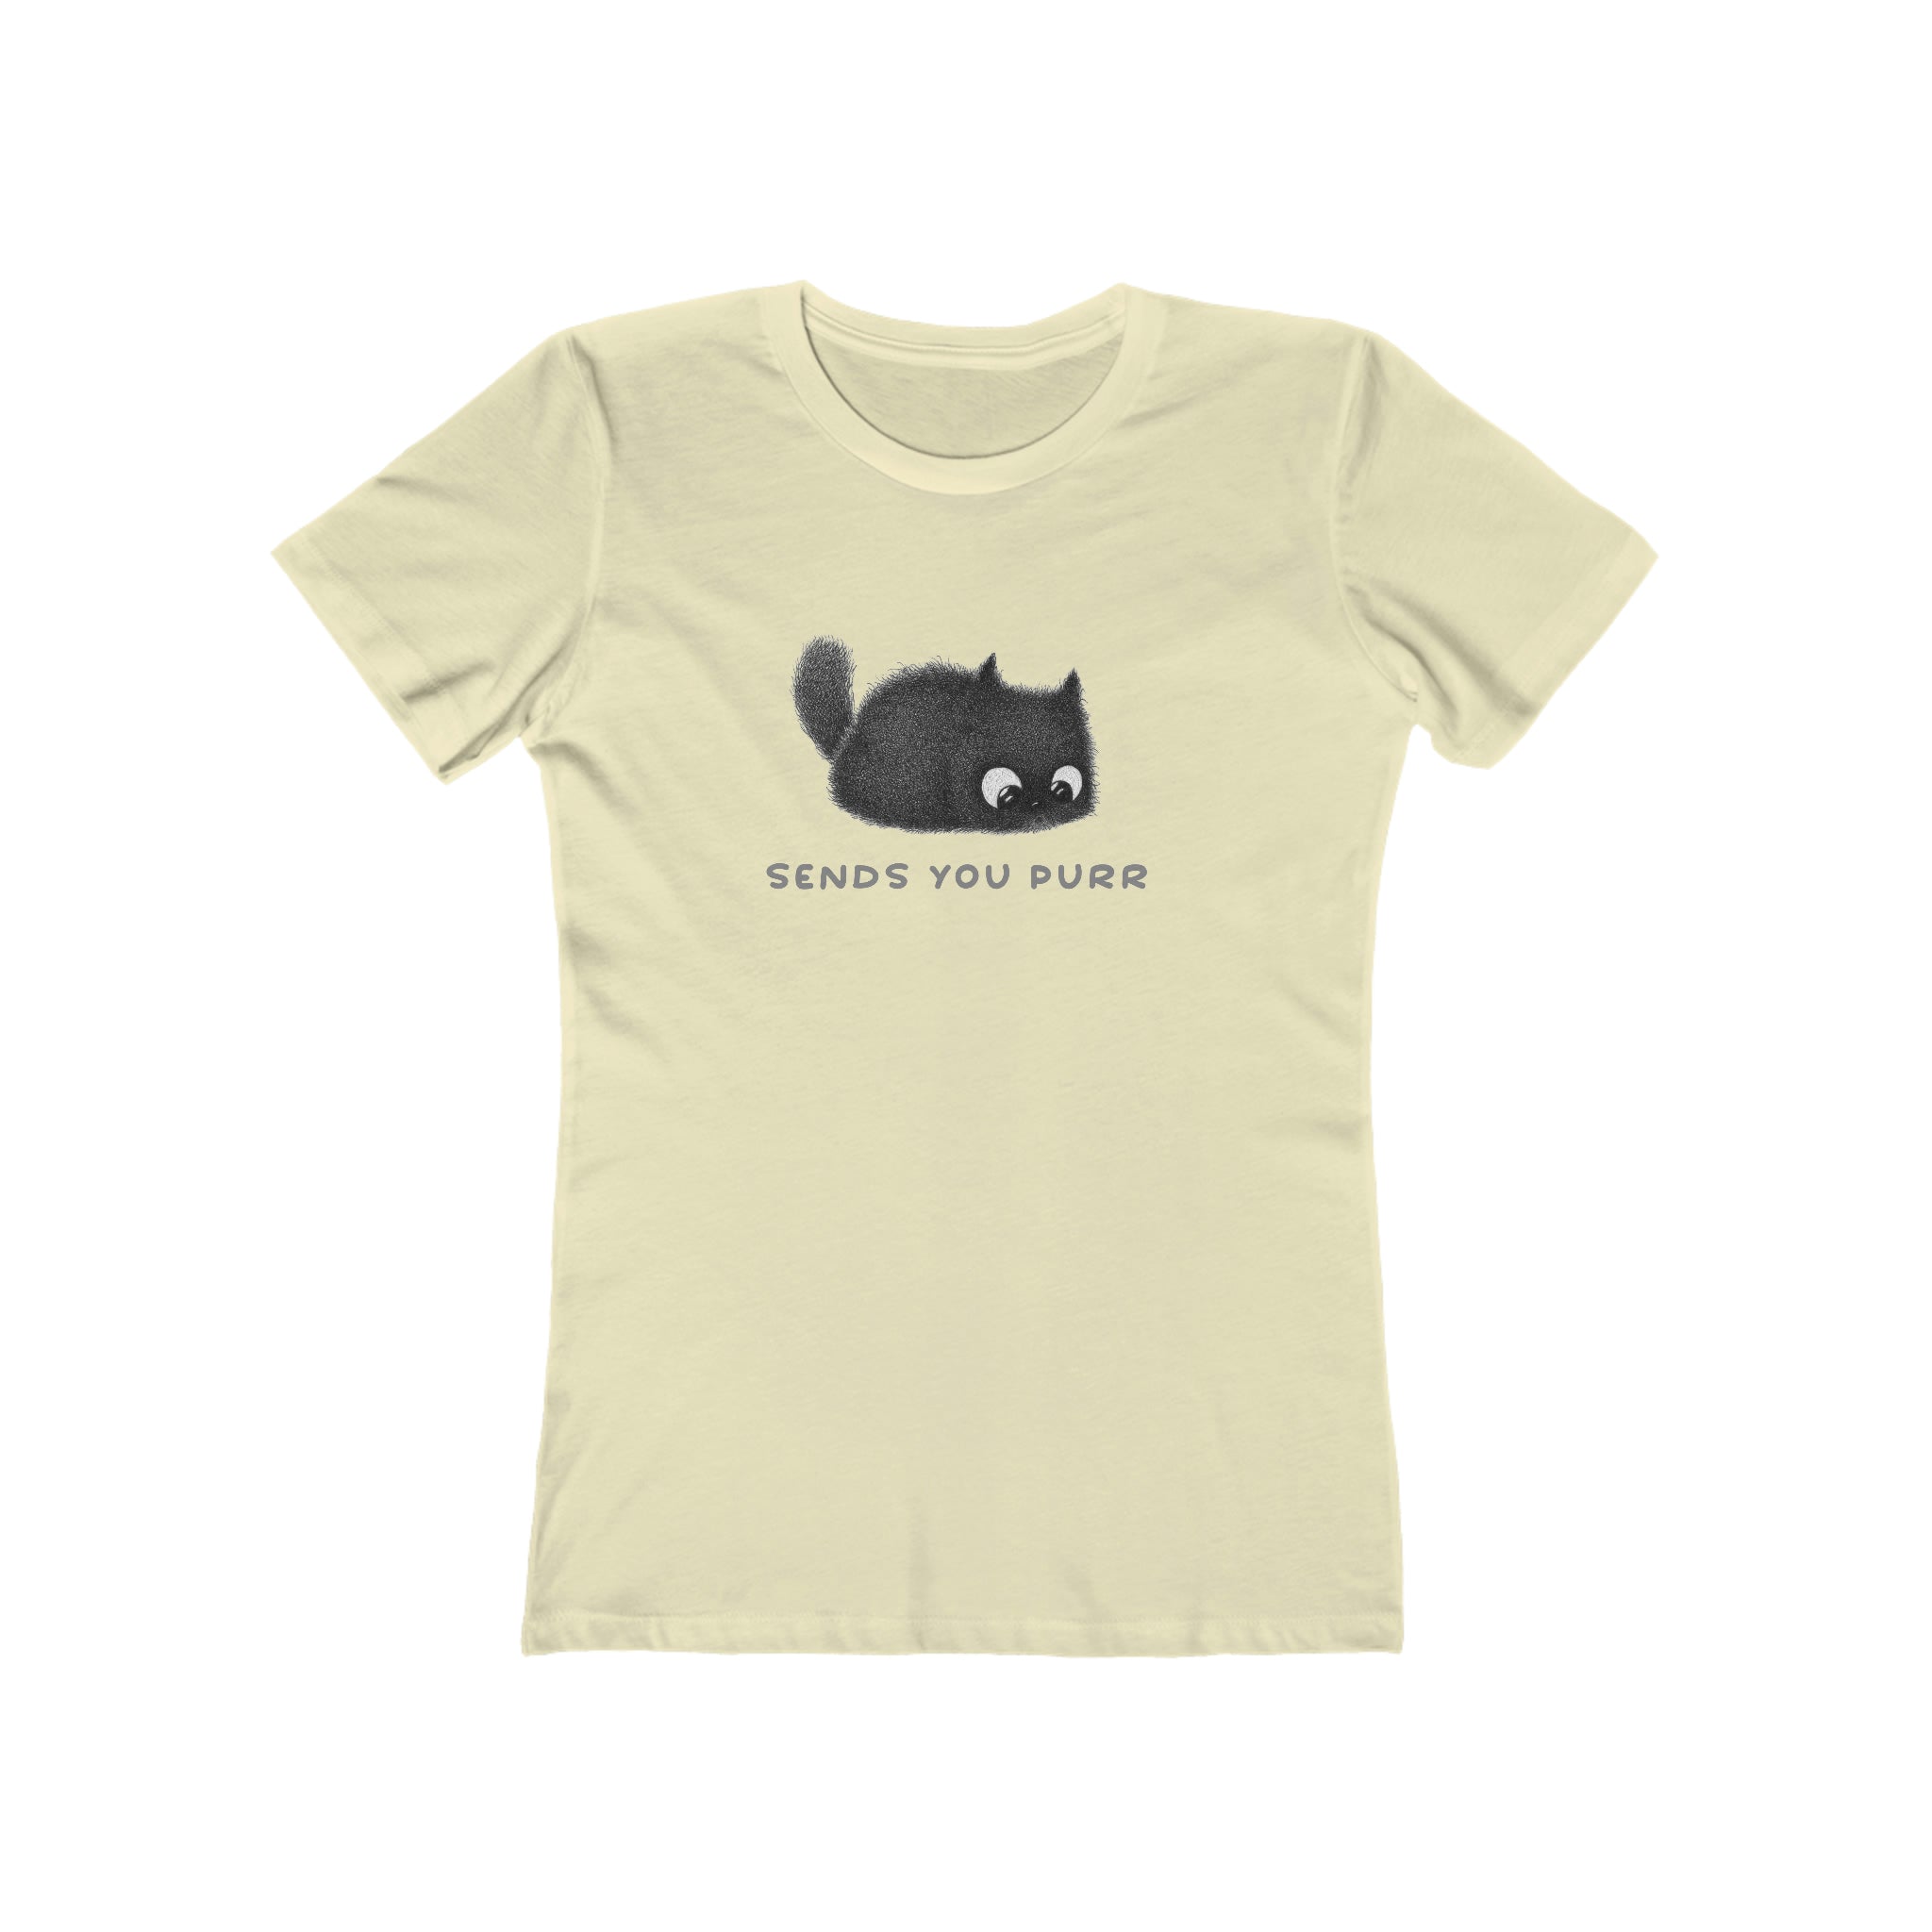 Sends You Purr : Women's 100% Cotton T-Shirt by Wholesomememes & Purr In Ink